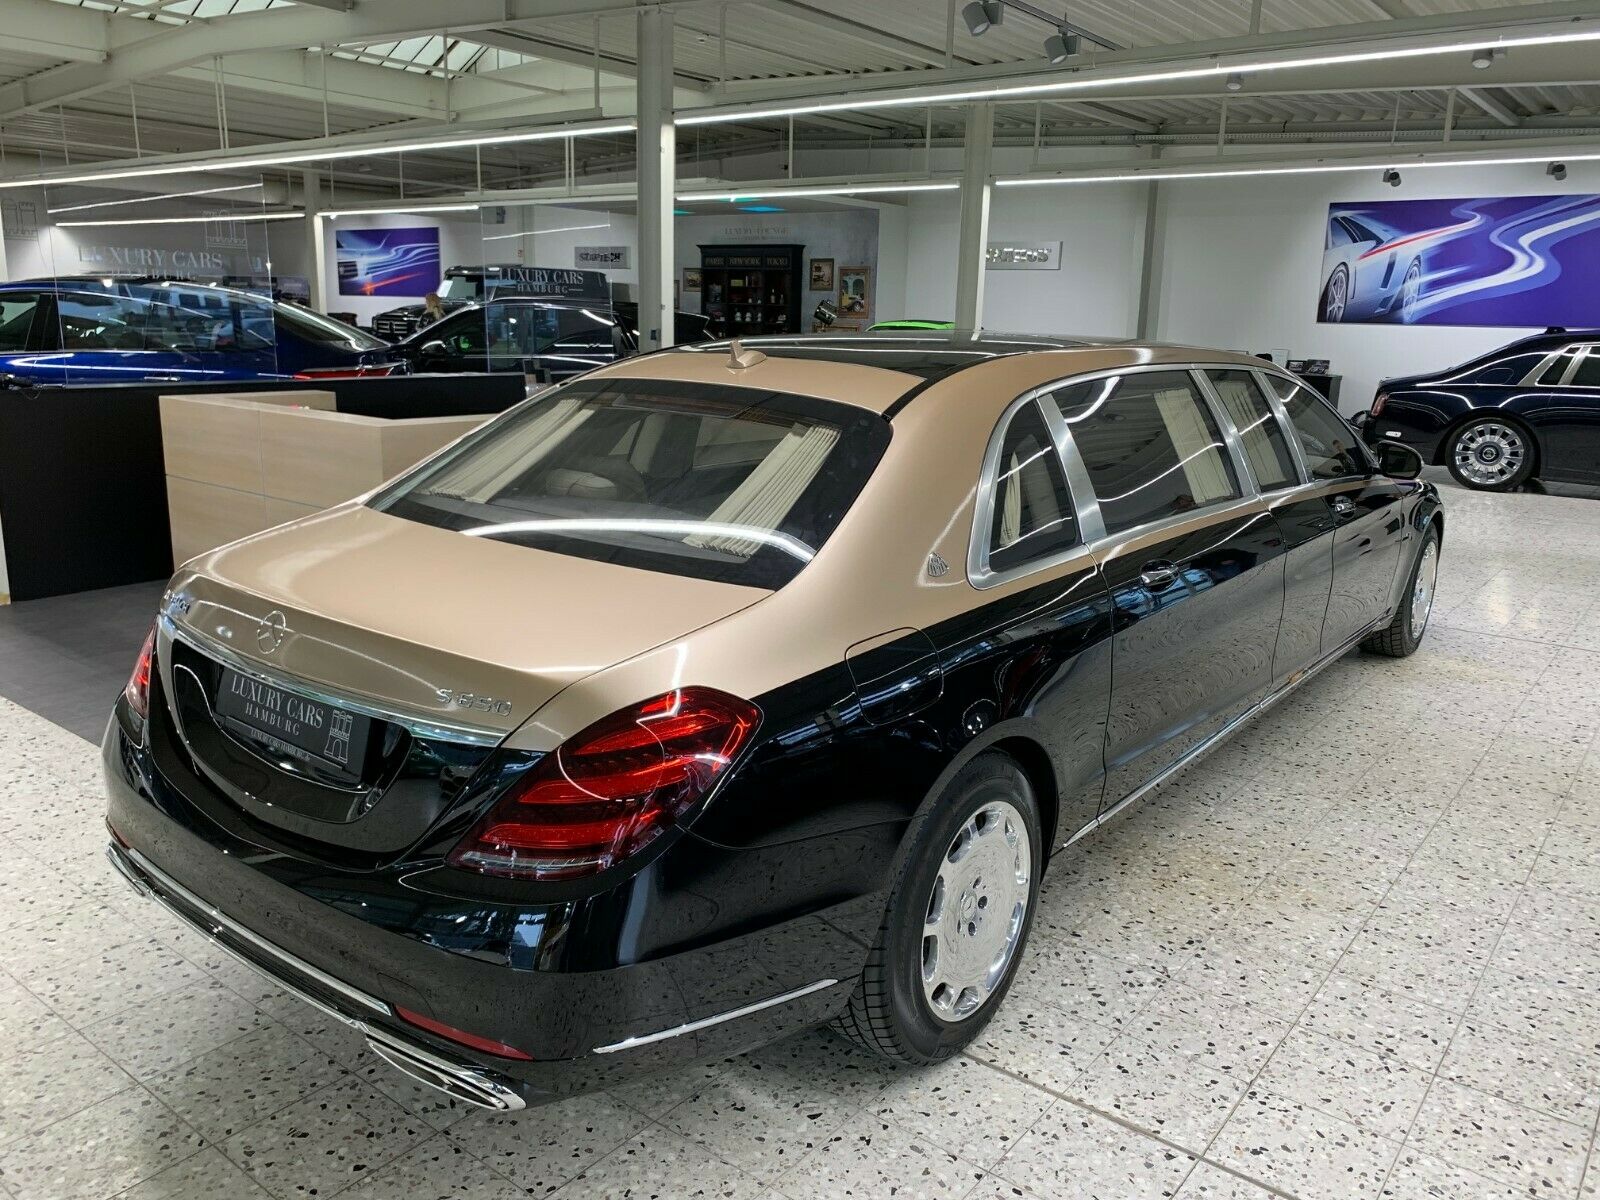 Mercedes Benz S 600 Maybach Pullman Luxury Pulse Cars Germany For Sale On Luxurypulse